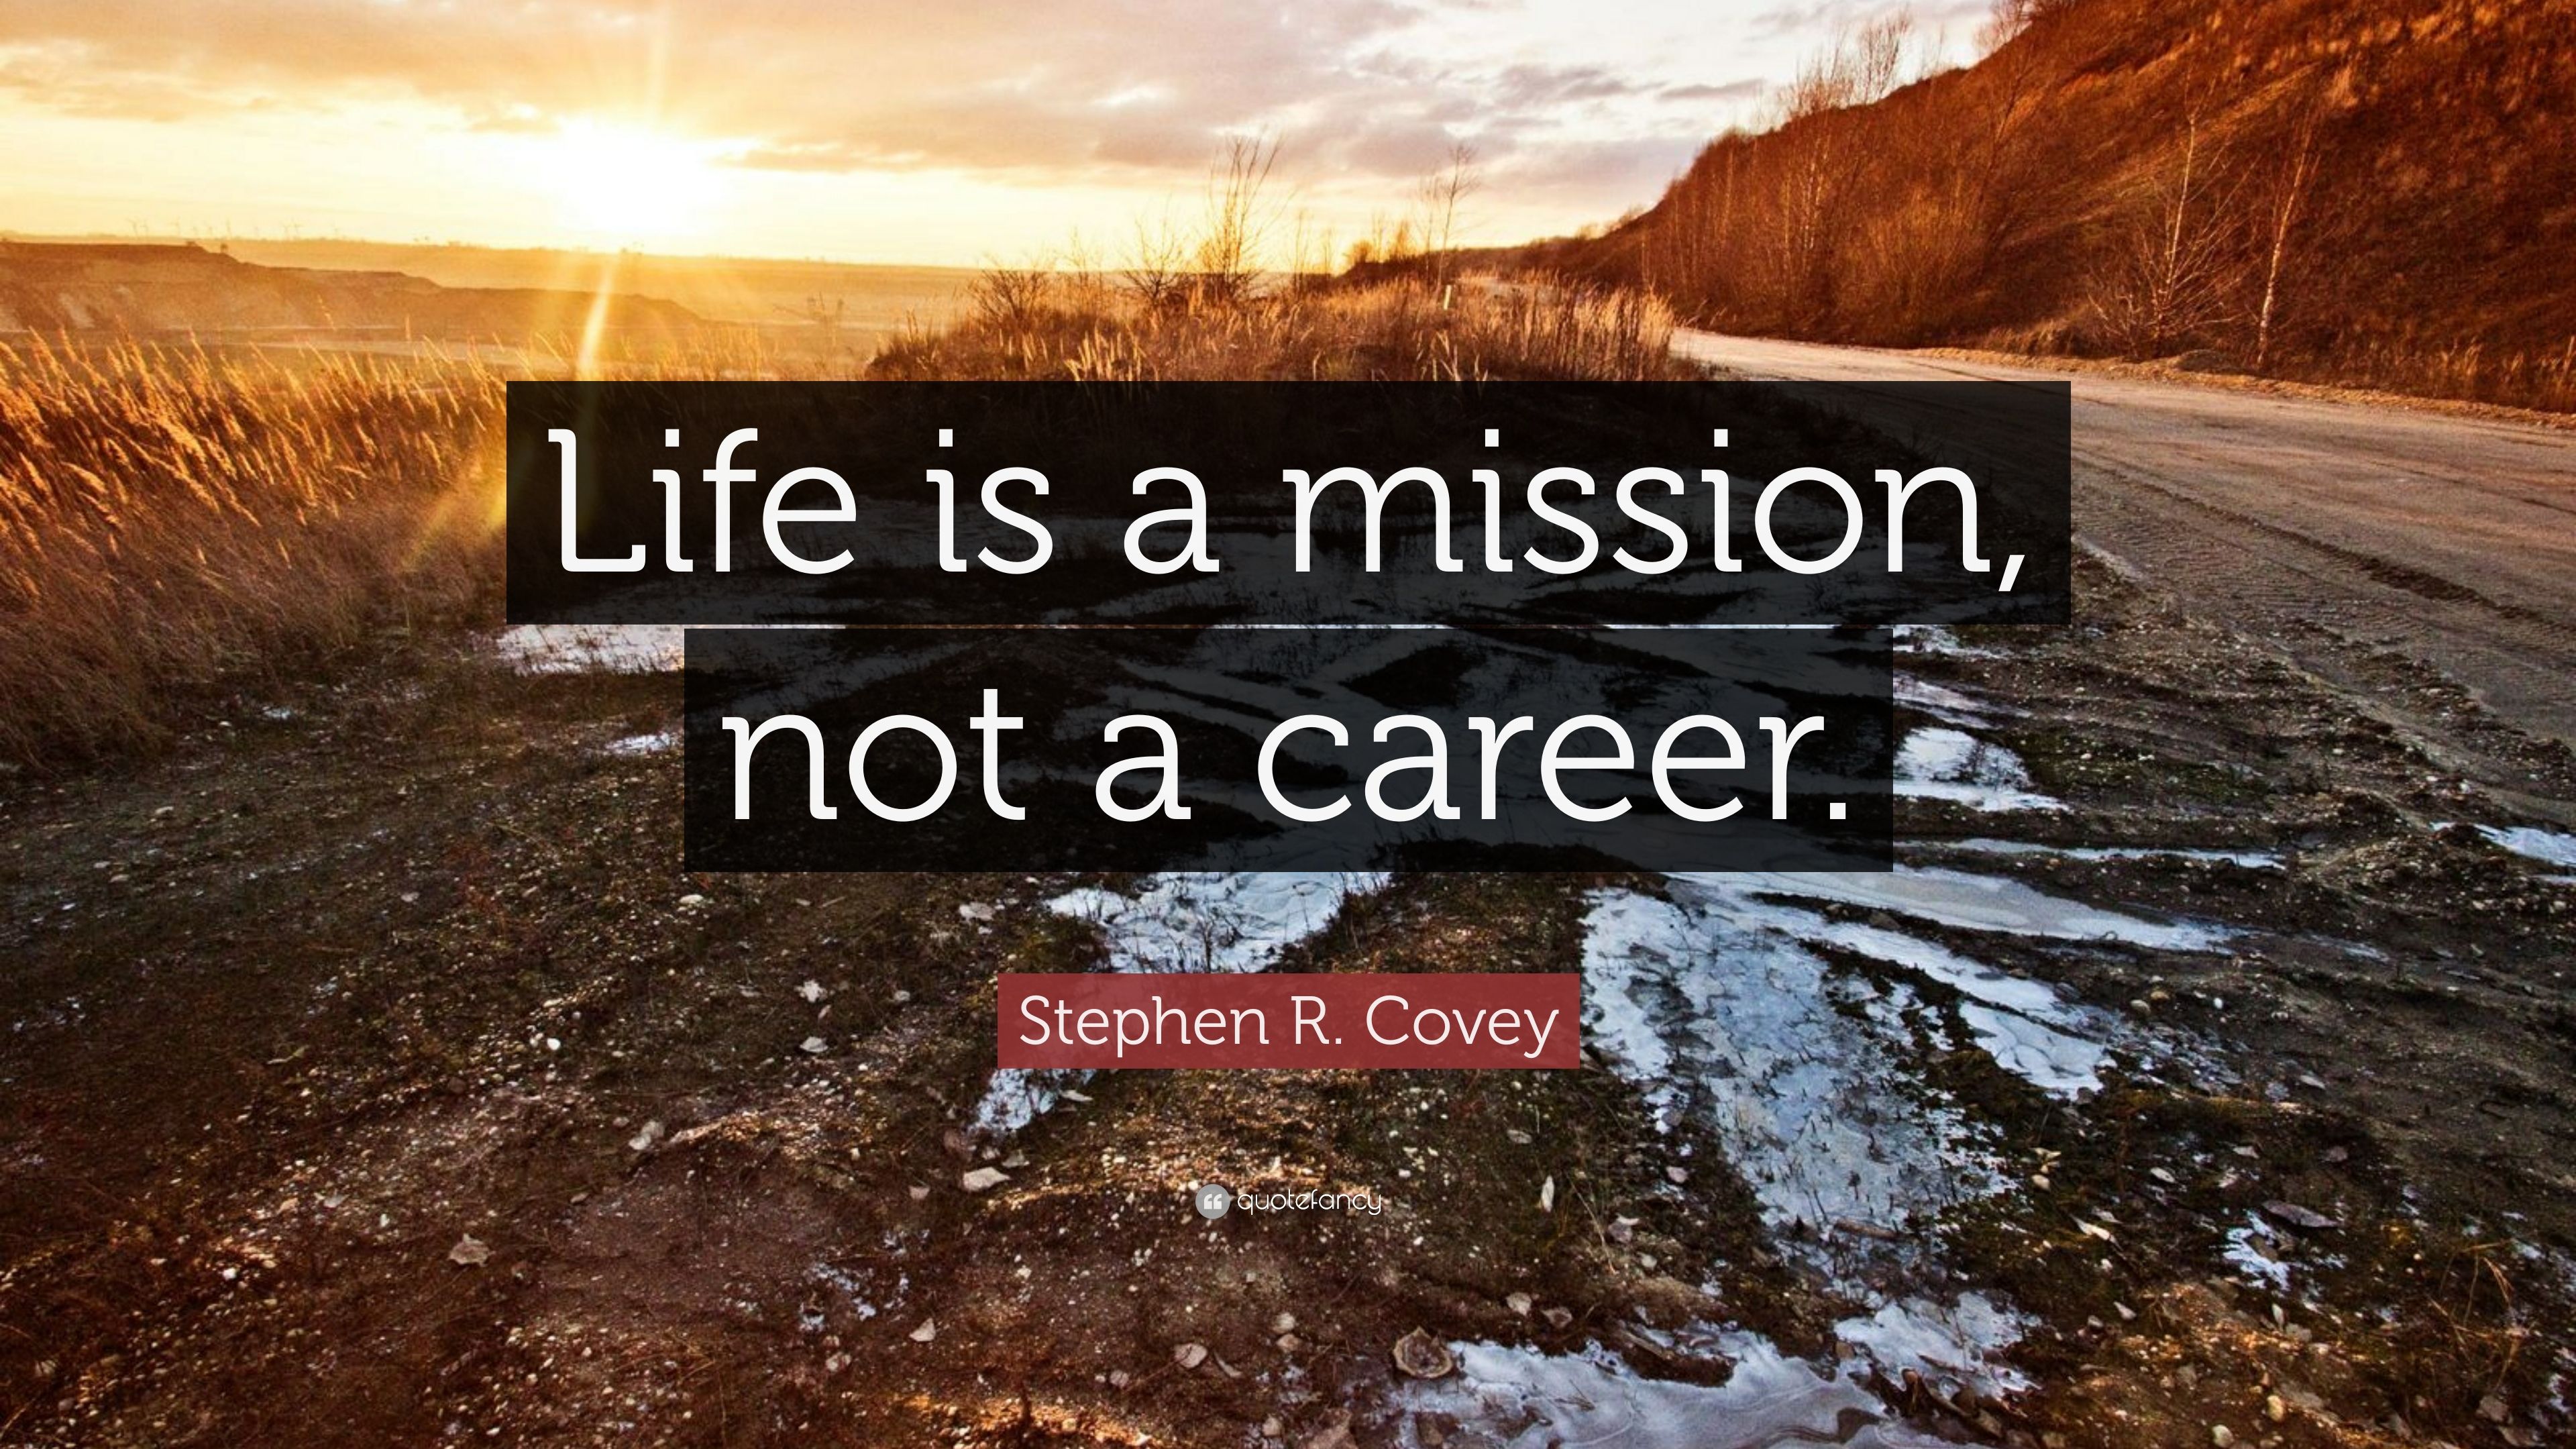 Stephen R. Covey Quote: “Life is a mission, not a career.” 12